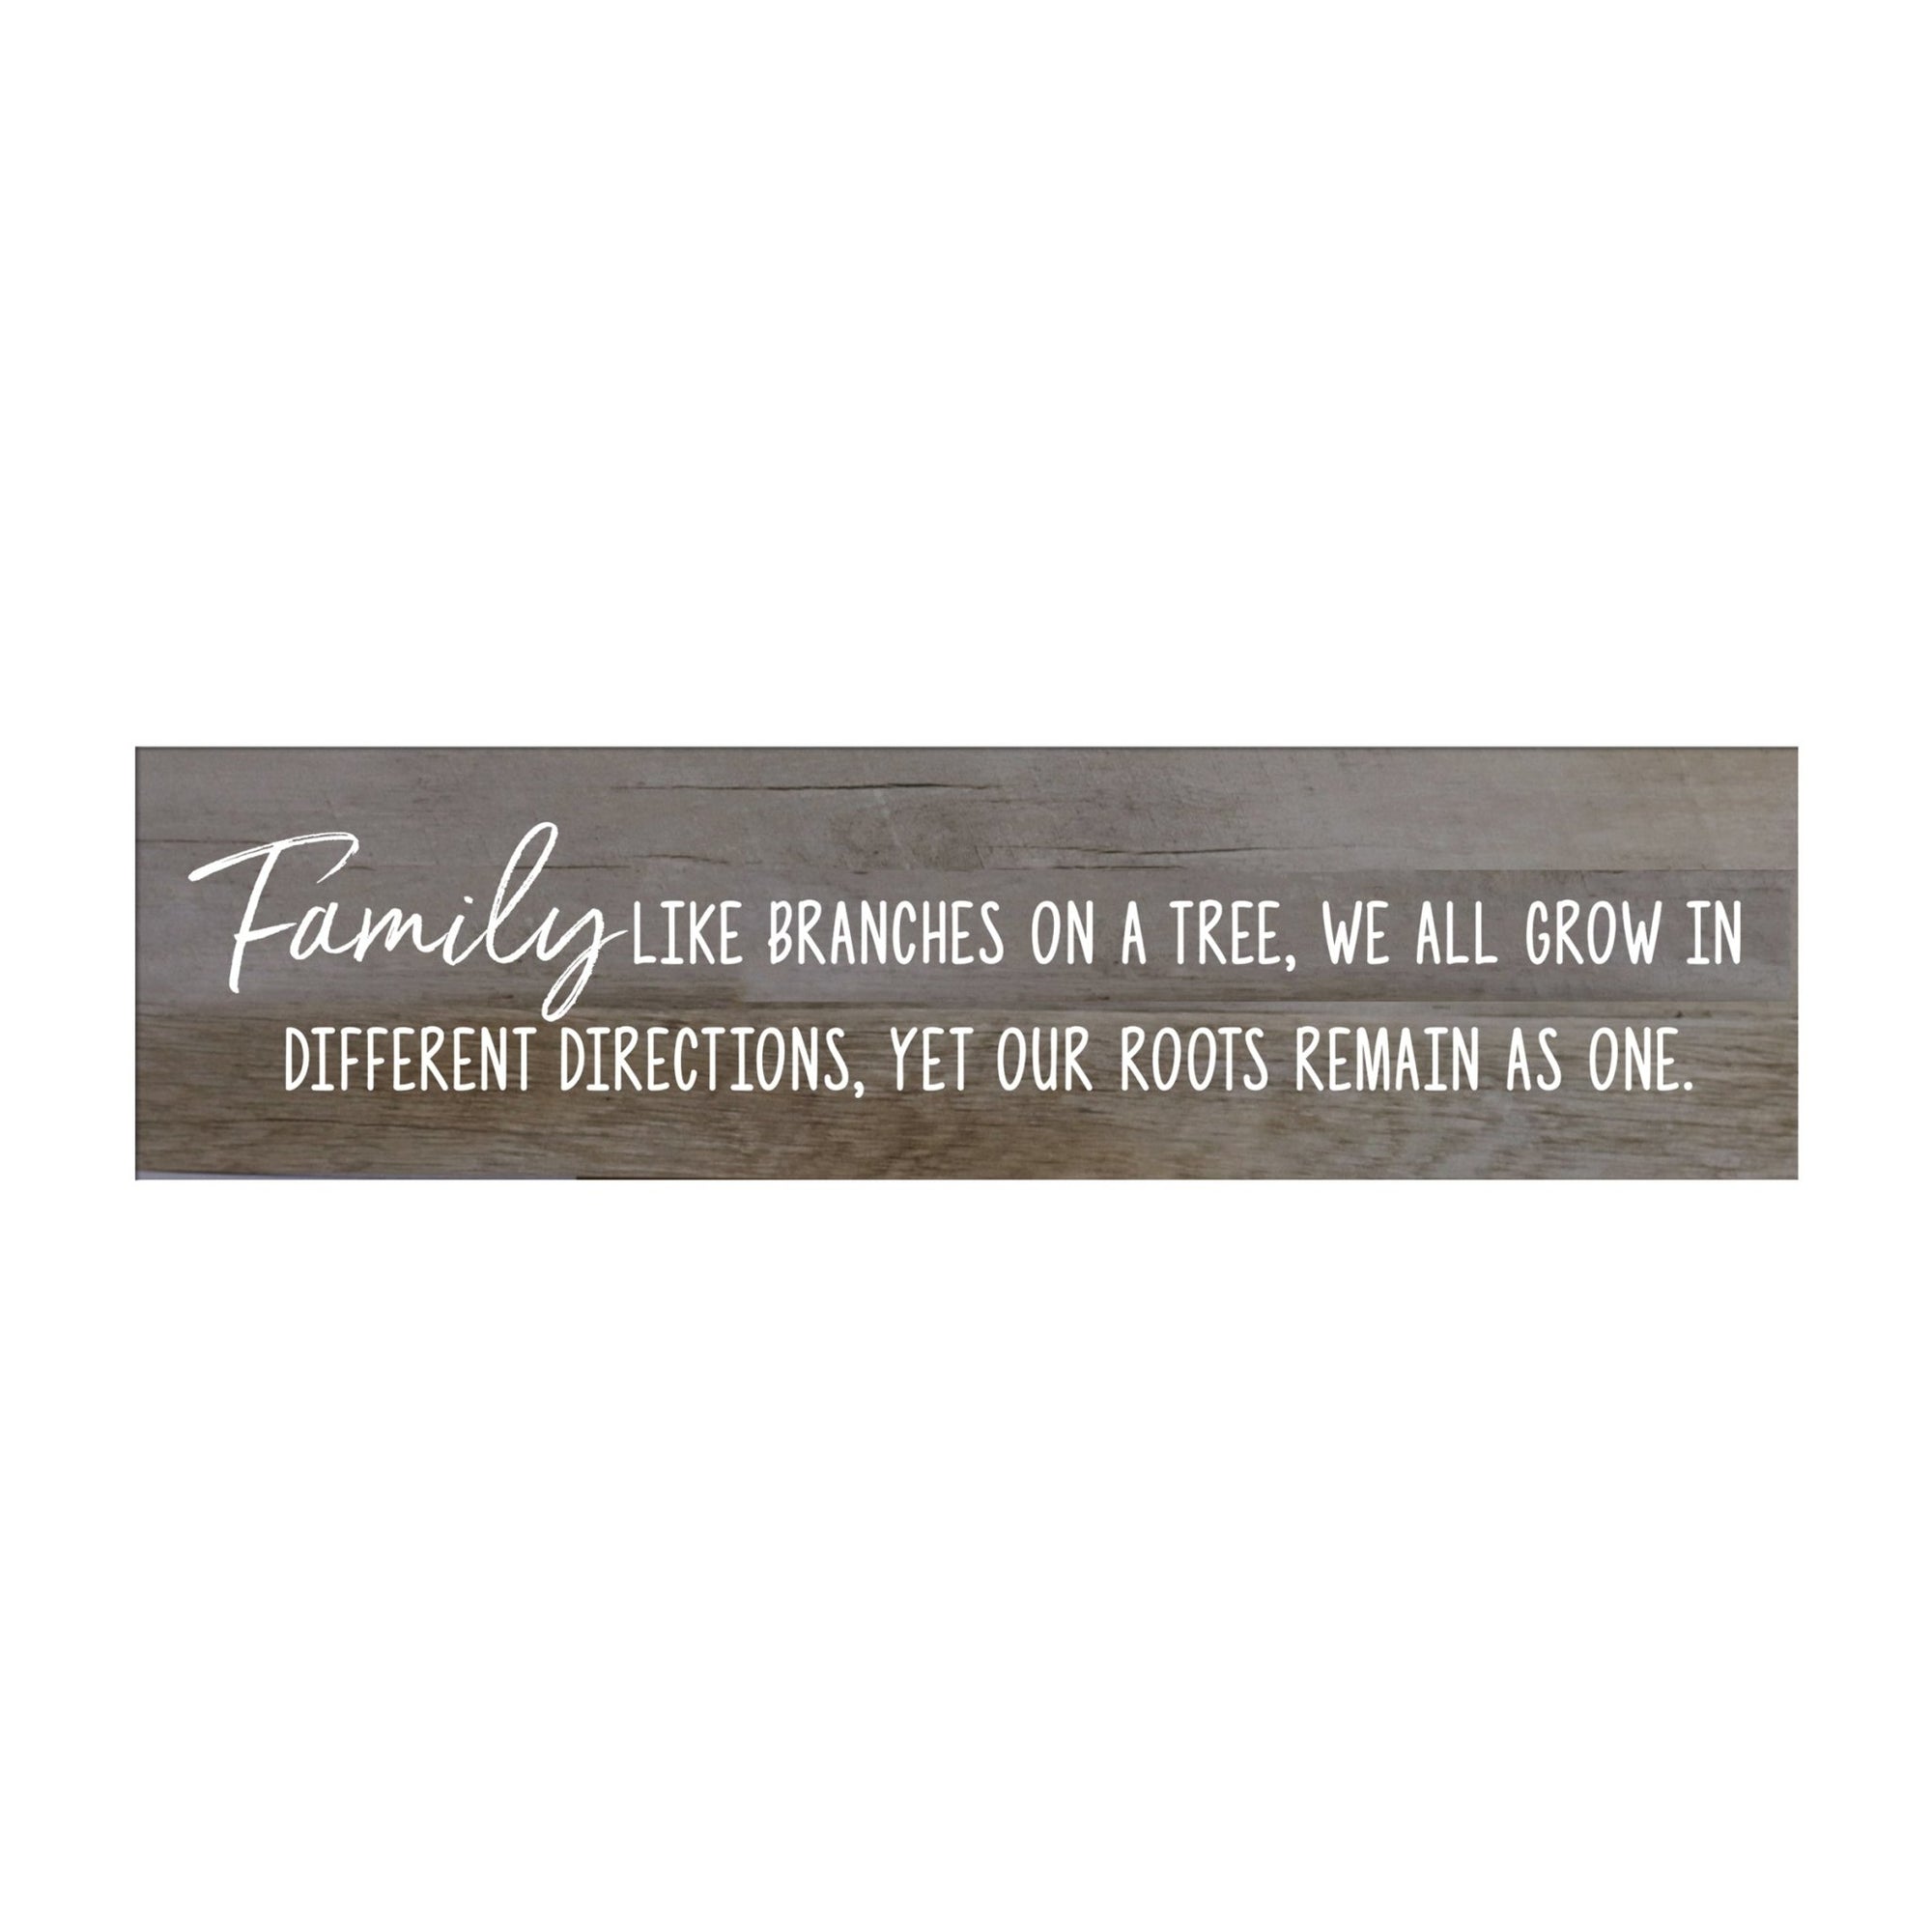 Inspirational Everyday Home and Family Wooden Wall Art Hanging Plaque 10 x 40 – Family Like Branches - LifeSong Milestones